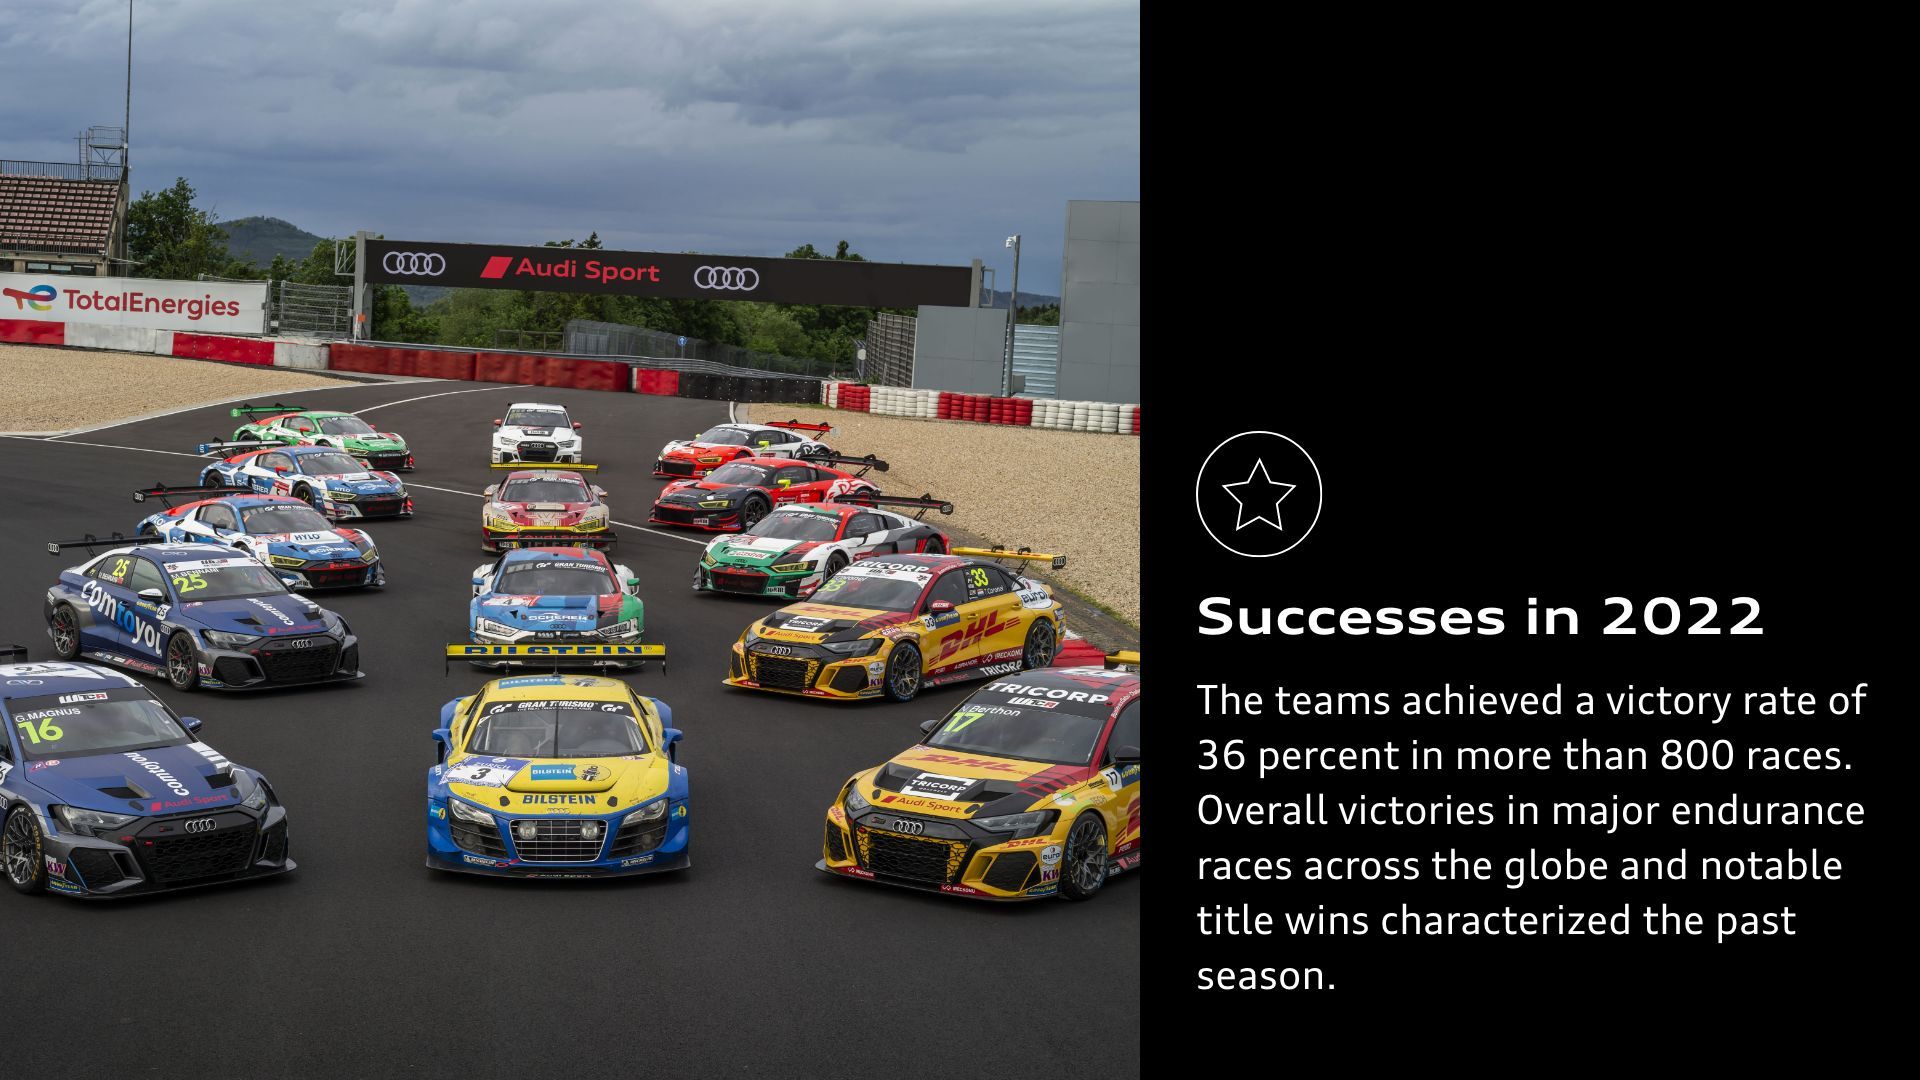 Successes in 2022: The teams achieved a victory rate of 36 percent in more than 800 races. Overall victories in major endurance races across the globe and notable title wins characterized the past season.